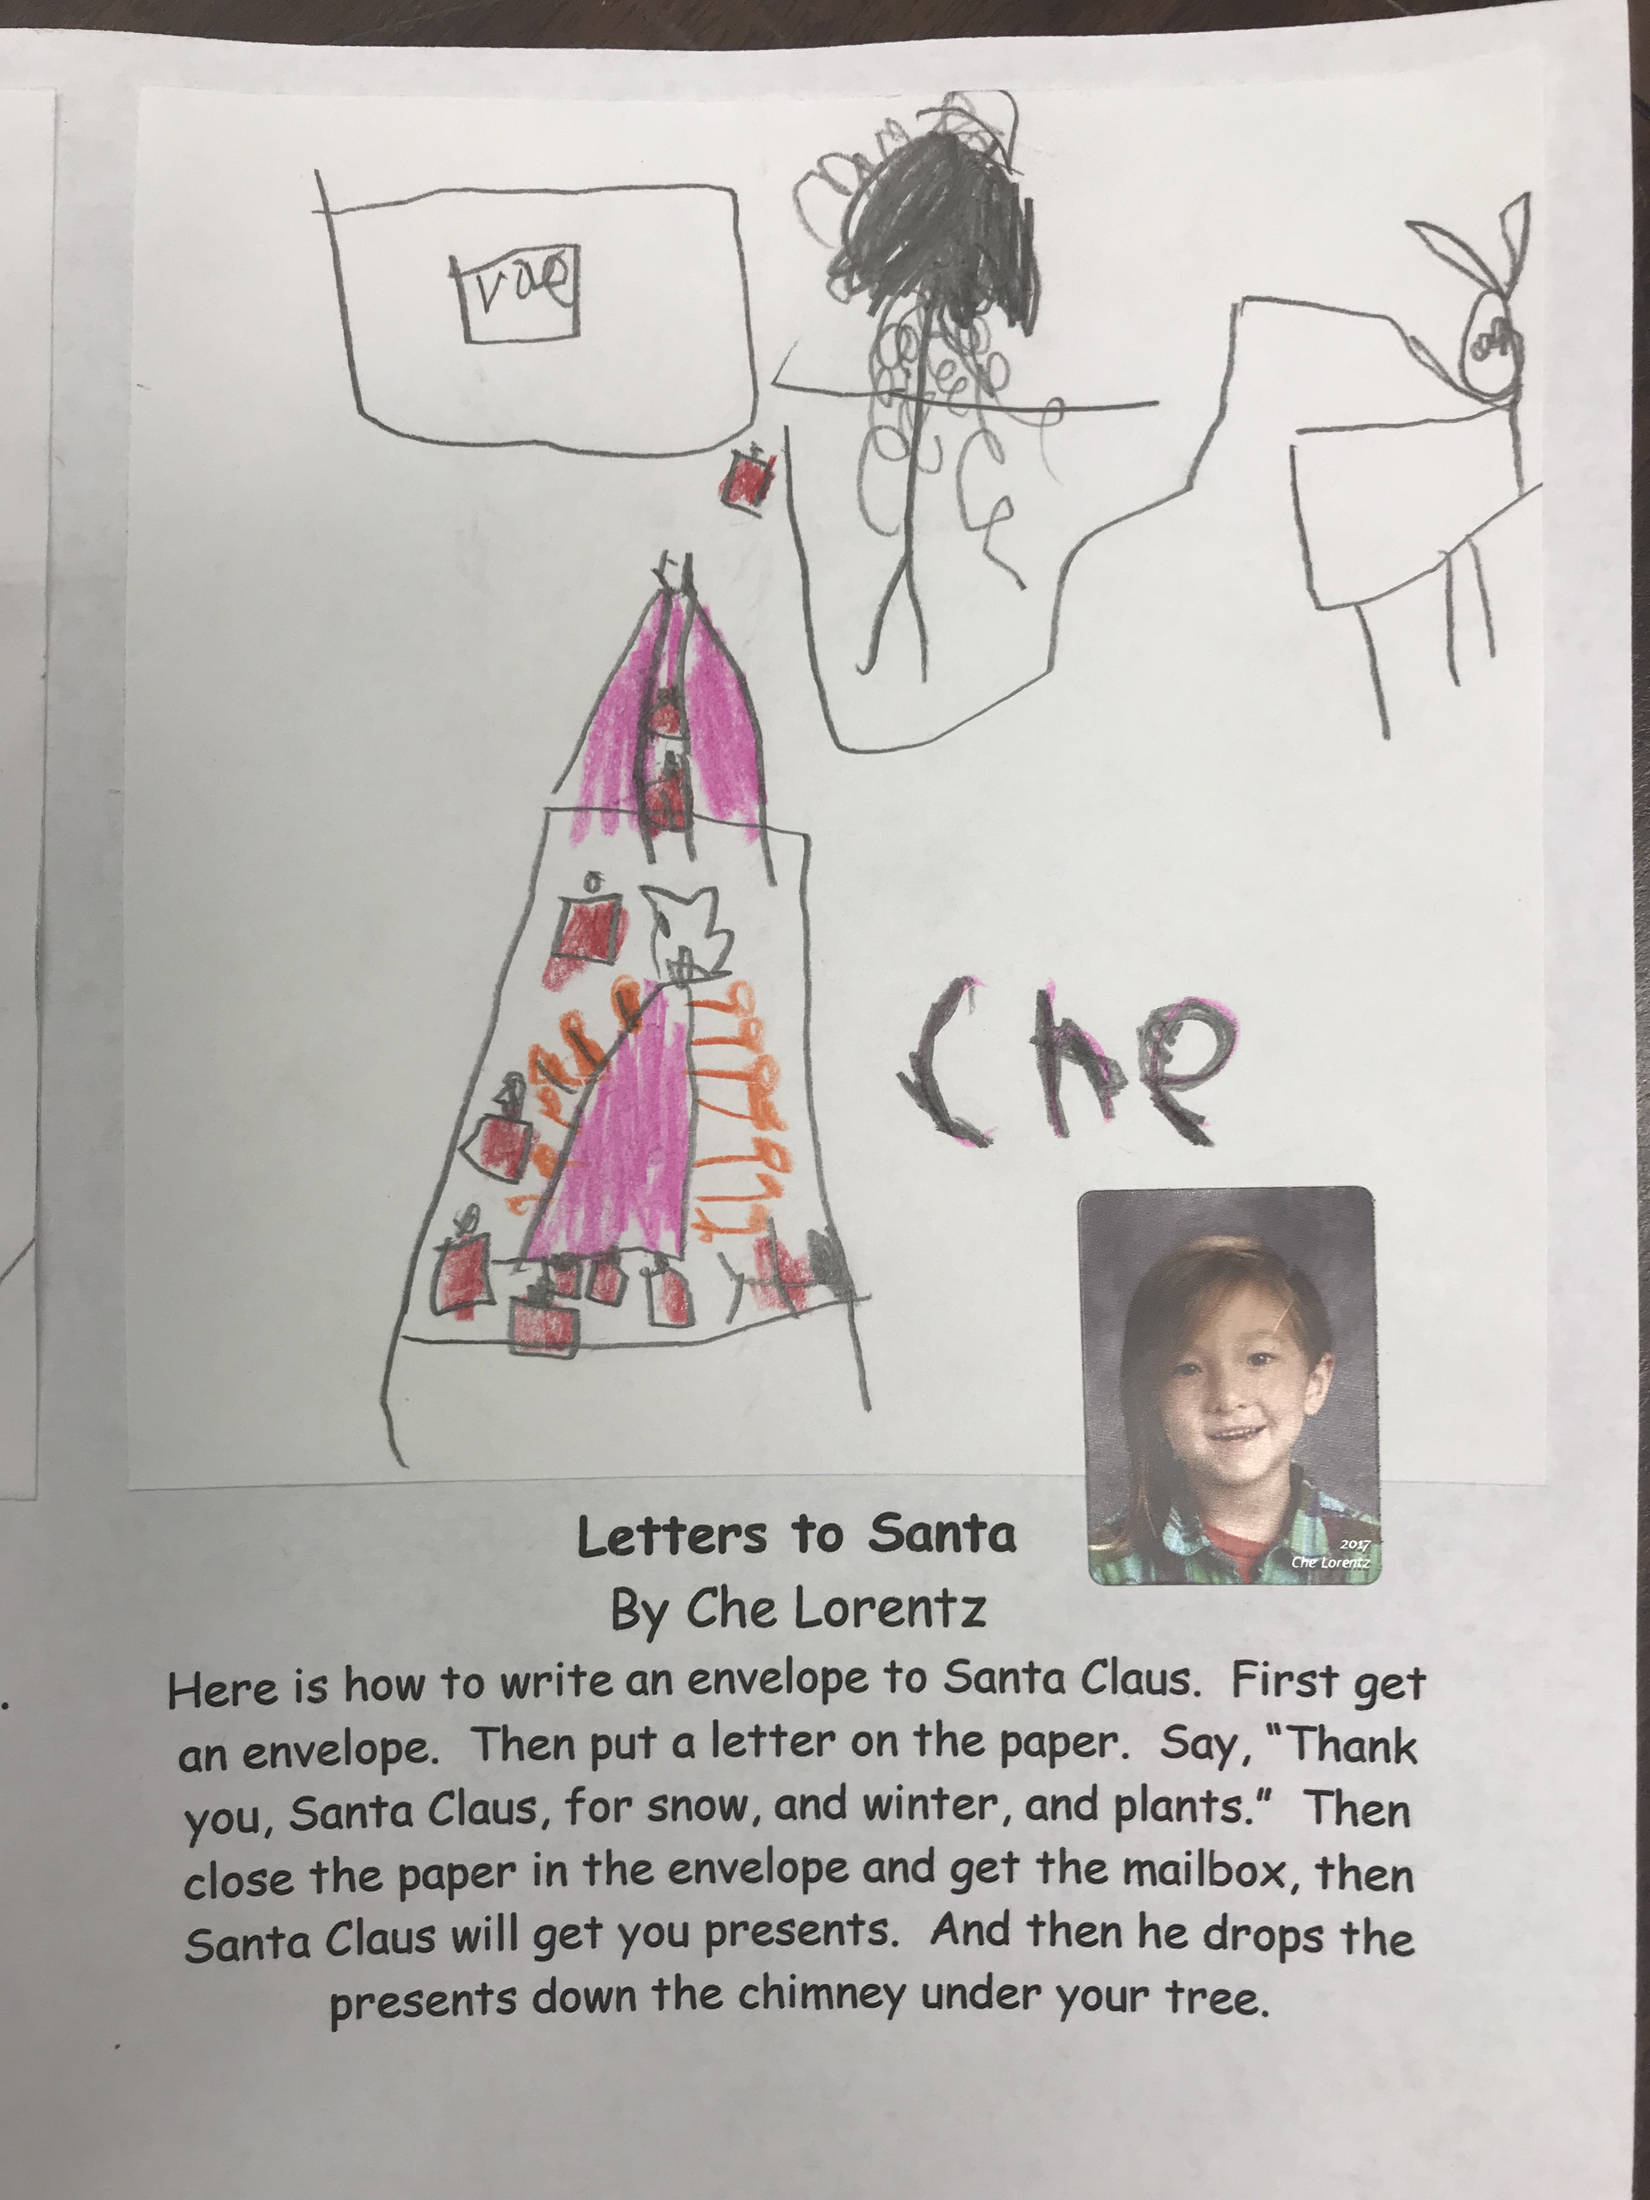 This holiday instruction made by Che Lorentz is part of an 18-page “How to Get Ready for the Holidays” book created by the students of Jennifer Reinhart’s kindergarten class. (Photo courtesy Jennifer Reinhart)